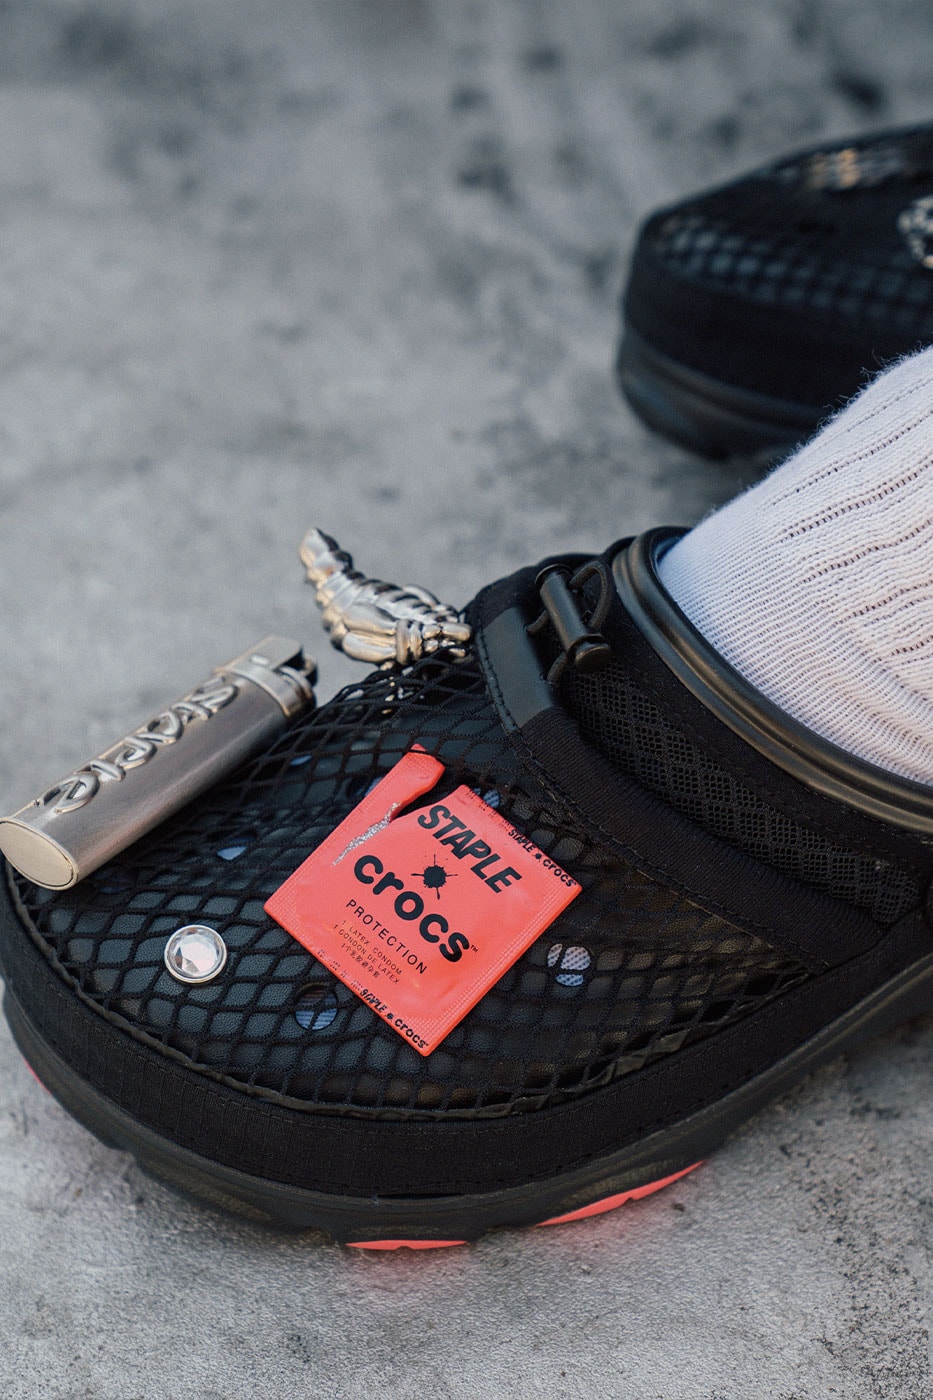 Crocs Joins Forces With STAPLE for Second Homing Pigeon Collab streetwear jeff staple jeffstaple clogs varsity jacket condom jibbitz lighter 